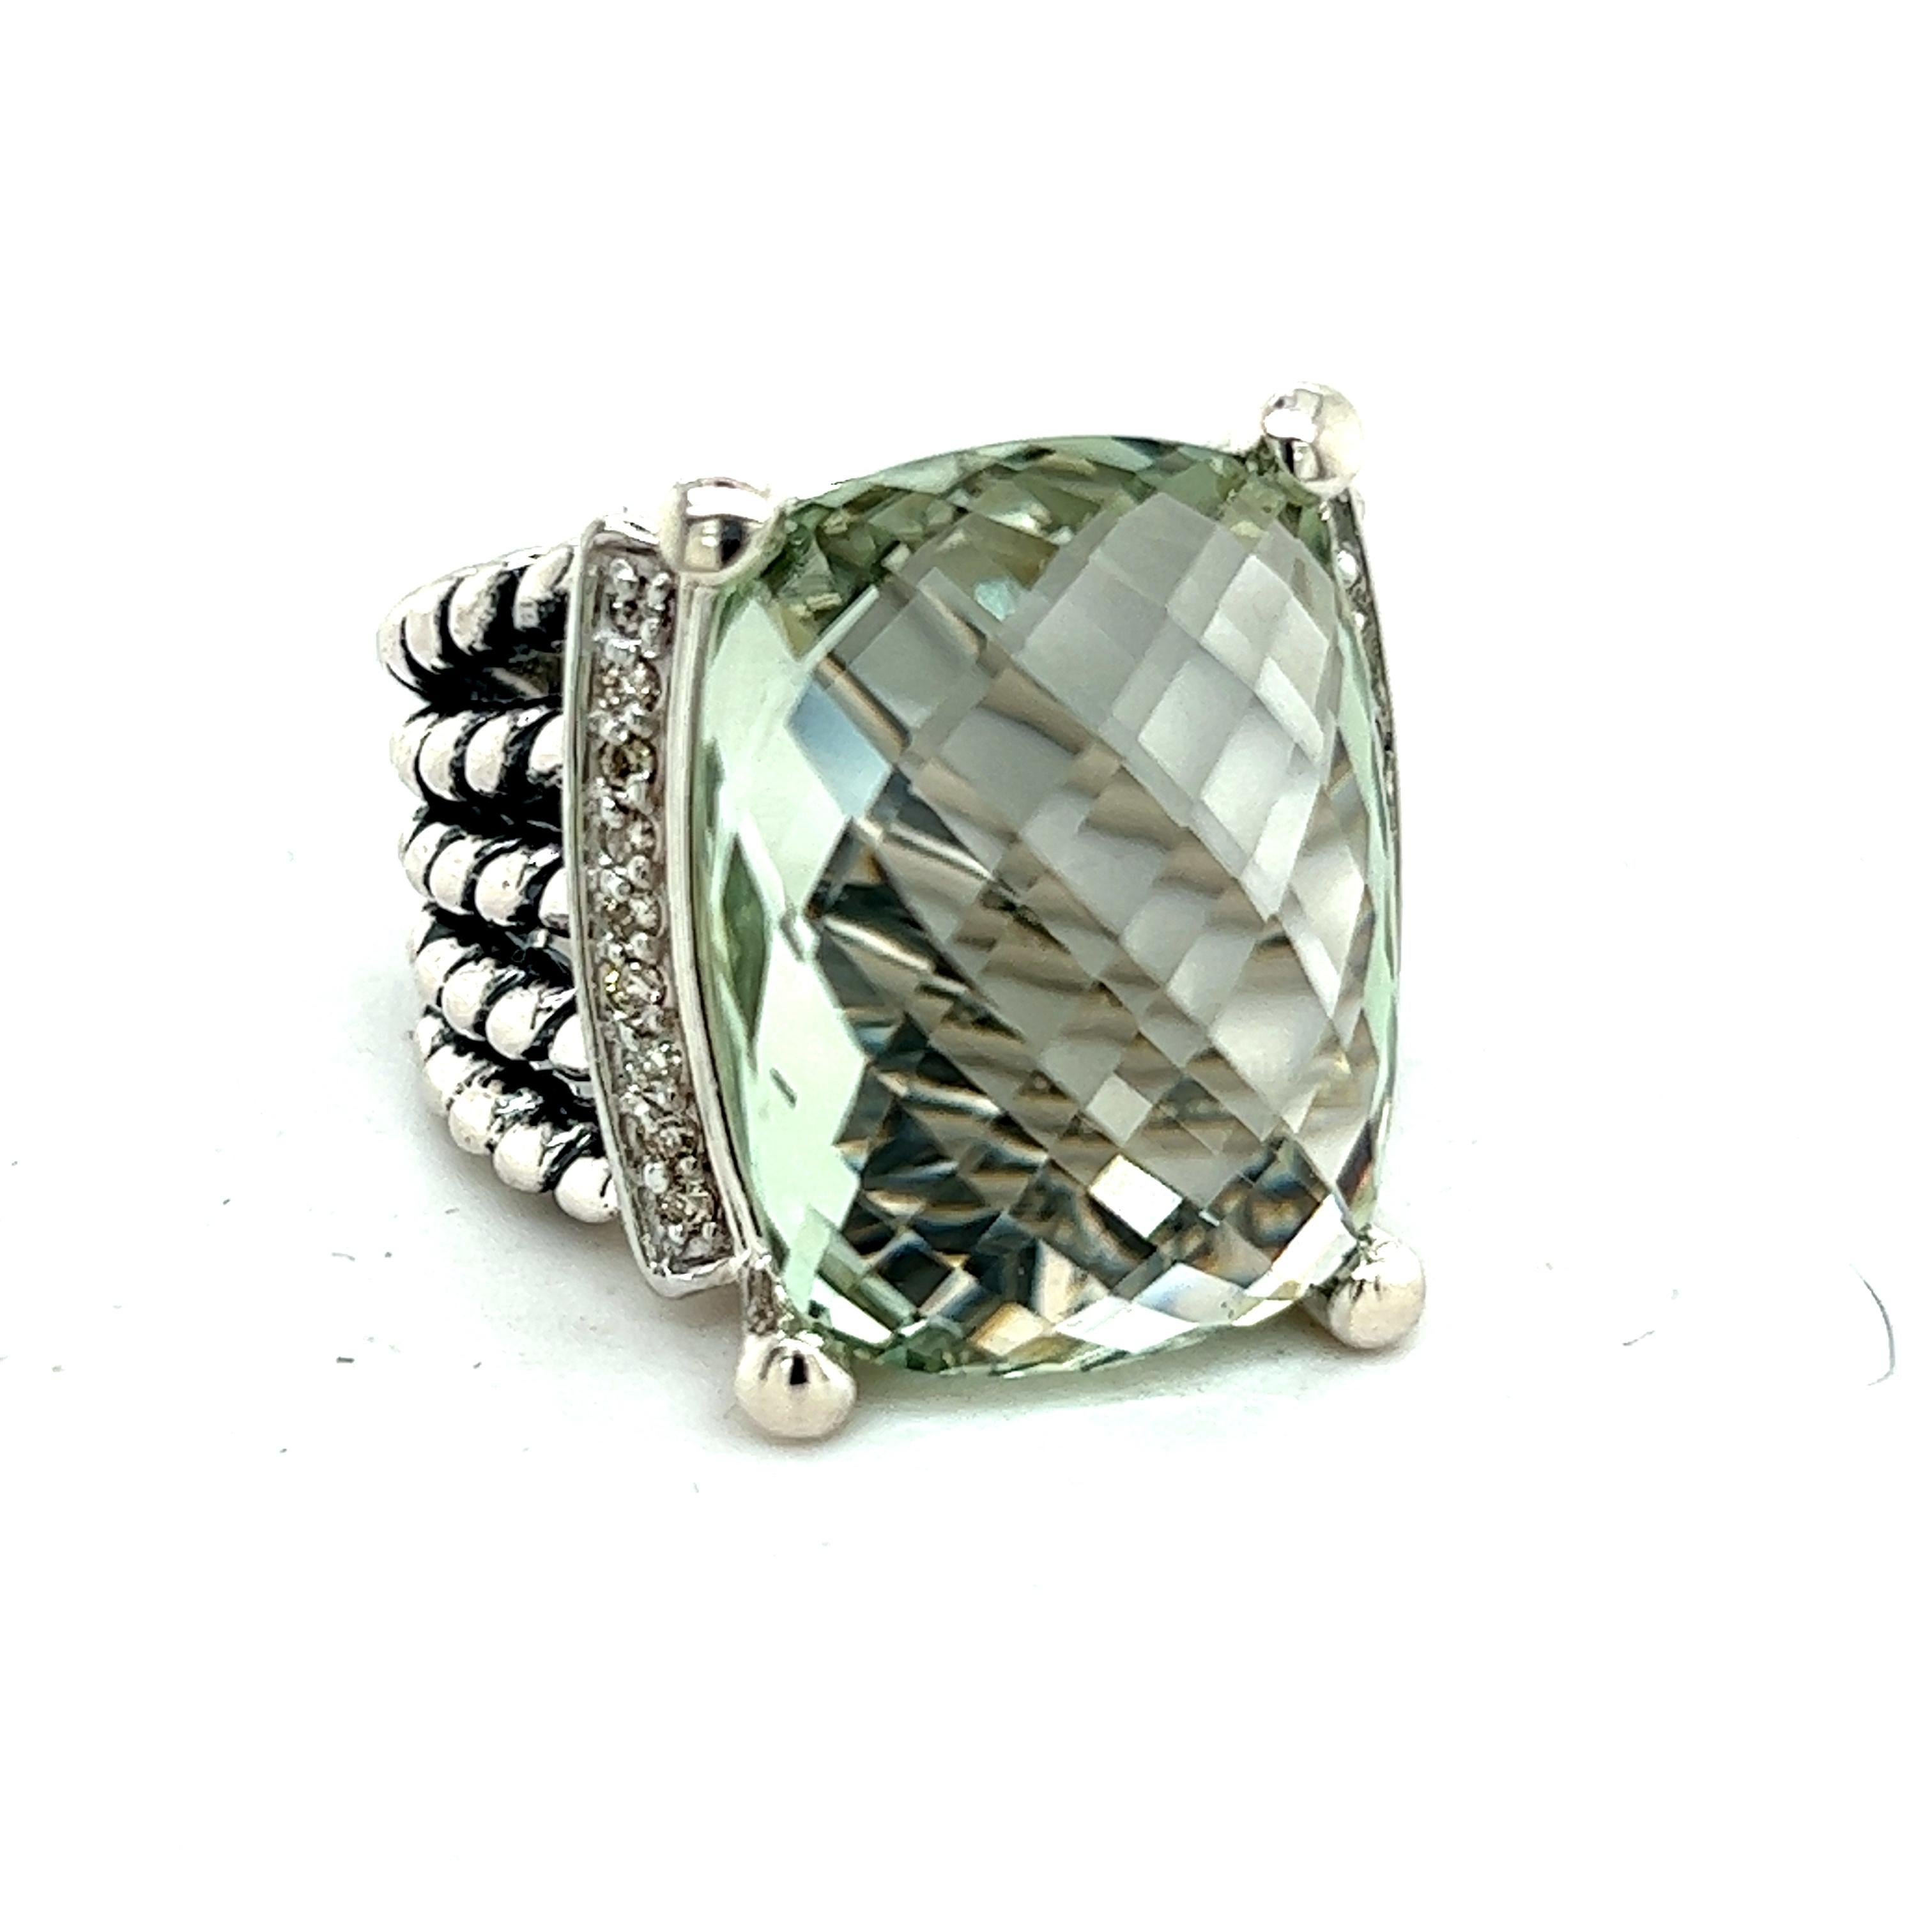 David Yurman Authentic Estate Wheaton Prasiolite Pave Diamond Ring 7.5 Silver 20 x 15 mm DY240

Retail: $1,599.00

This elegant Authentic David Yurman ring is made of sterling silver.

TRUSTED SELLER SINCE 2002

PLEASE SEE OUR HUNDREDS OF POSITIVE